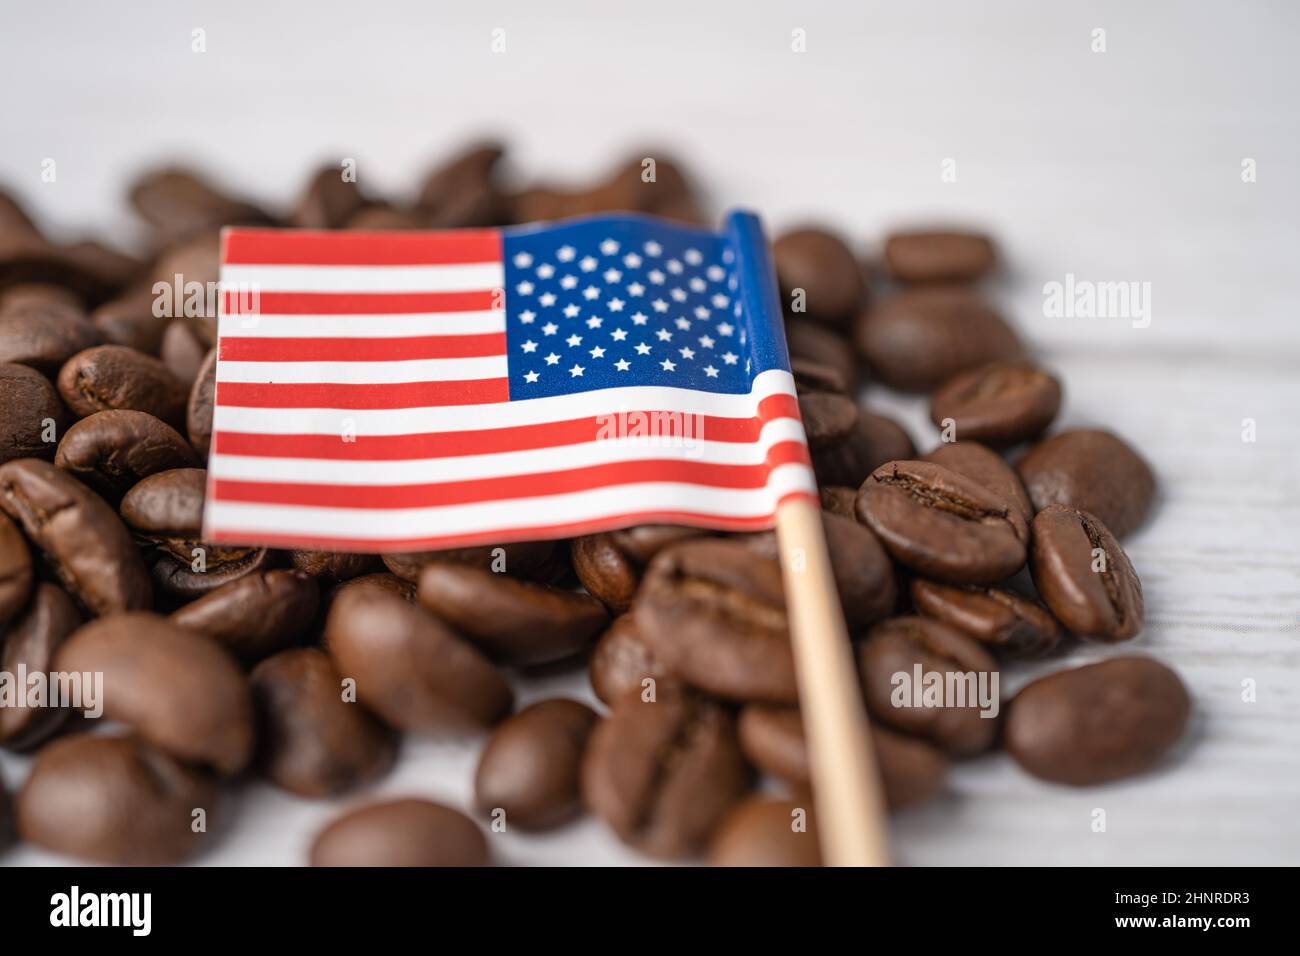 USA America flag on coffee beans; import export drink food concept. Stock Photo